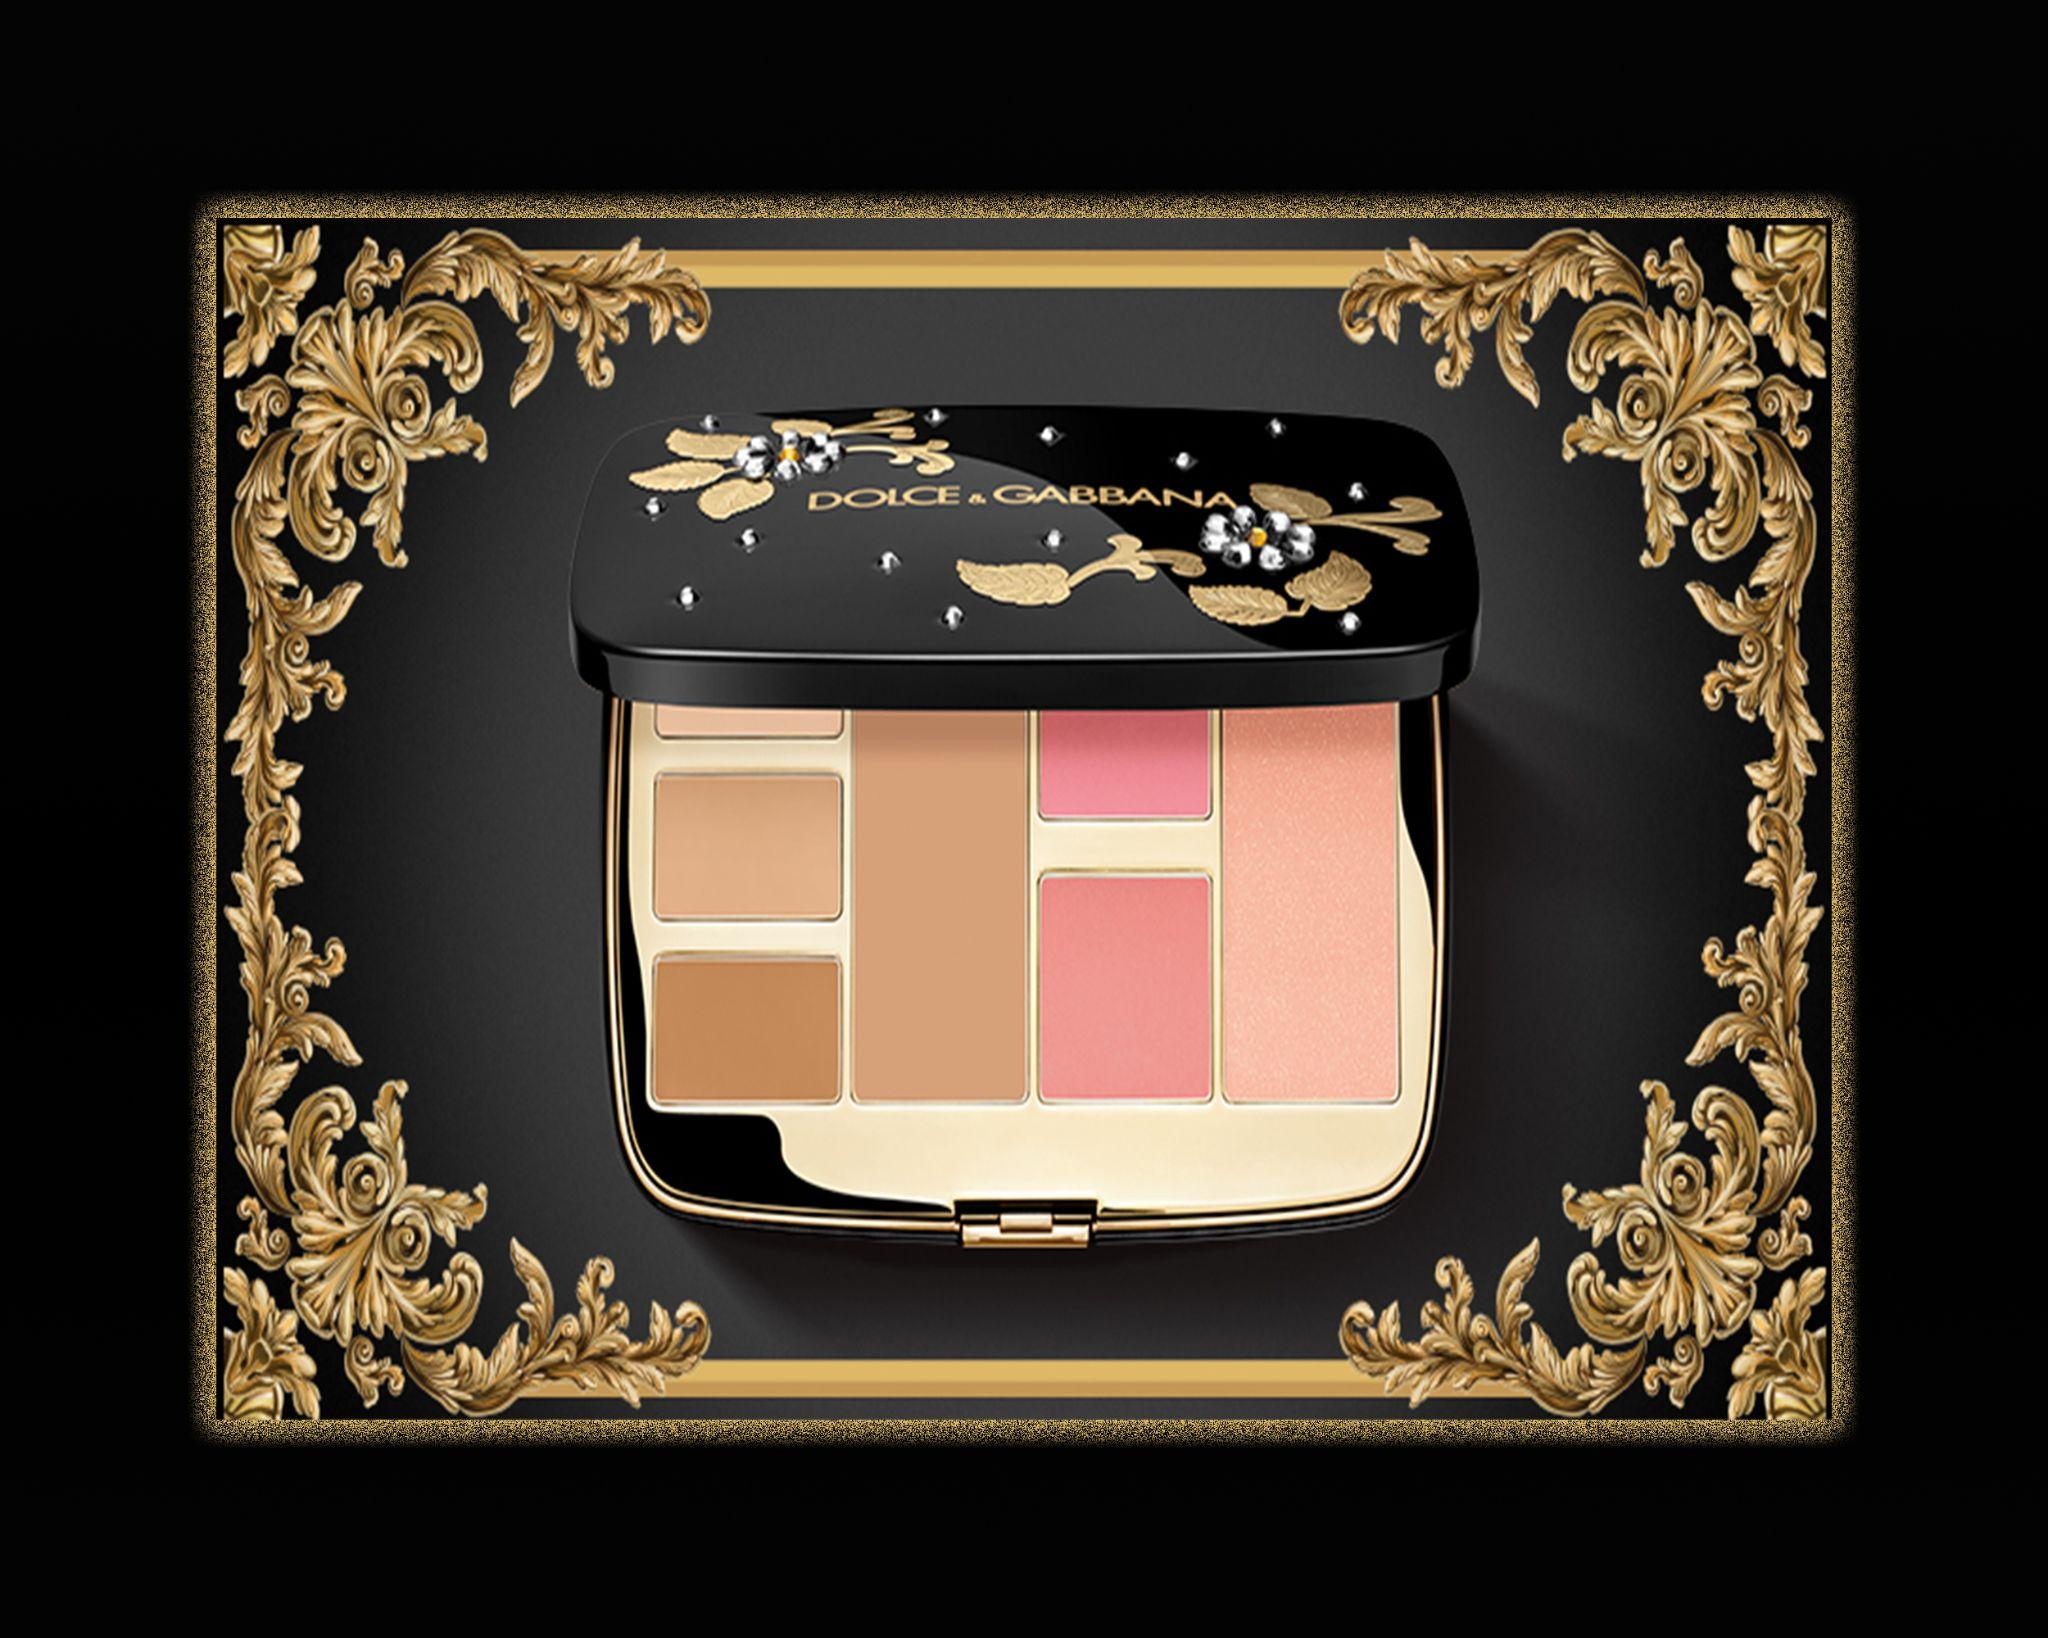 Dolce & Gabbana Dolce Skin All-In-One Face Palette